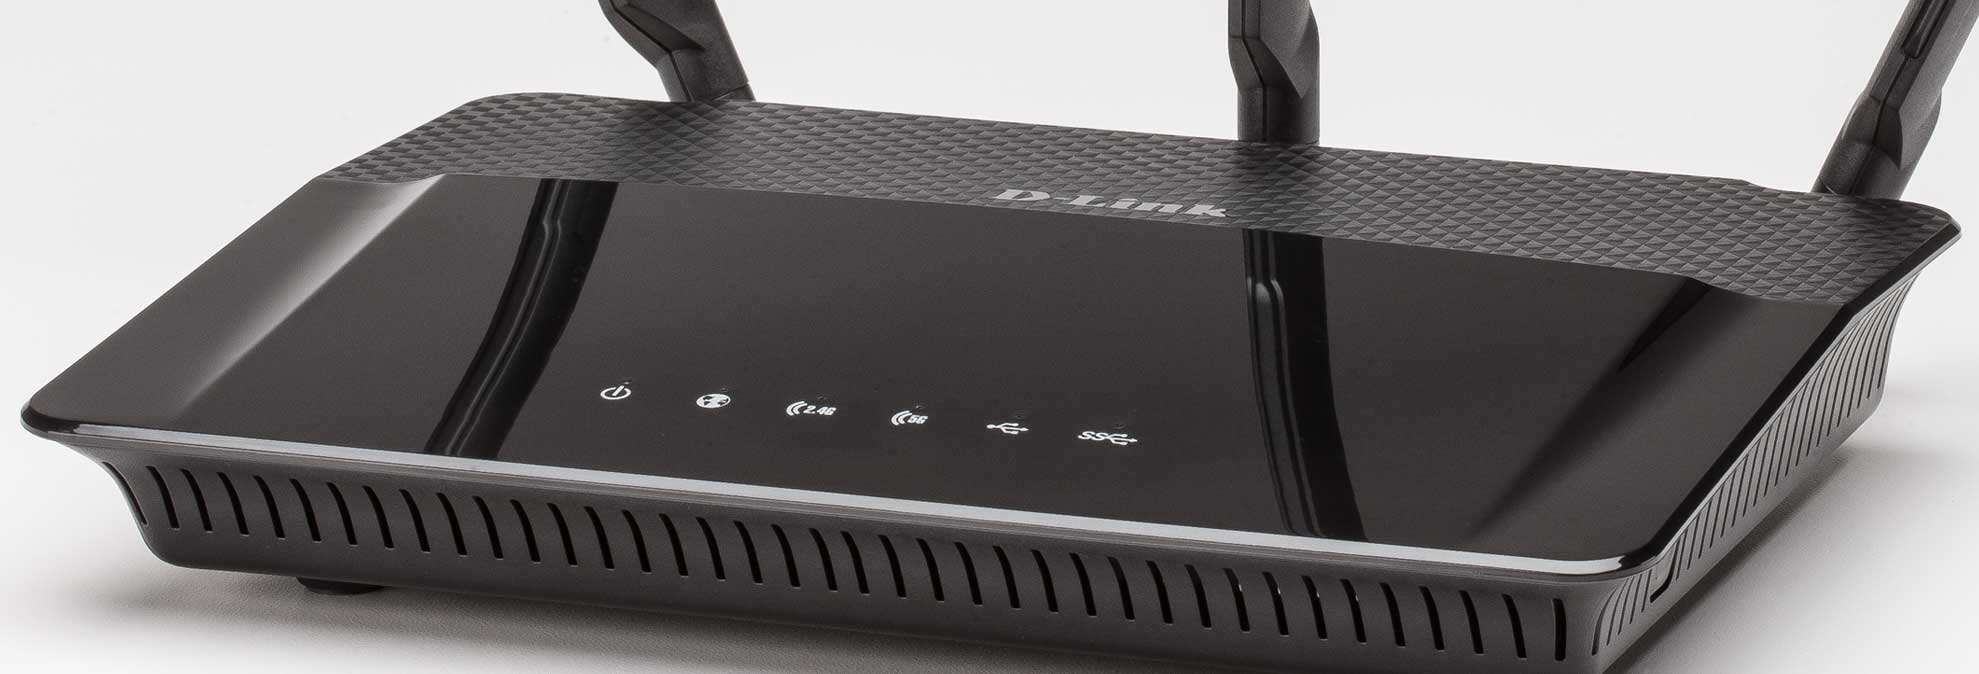 best budget routers in India